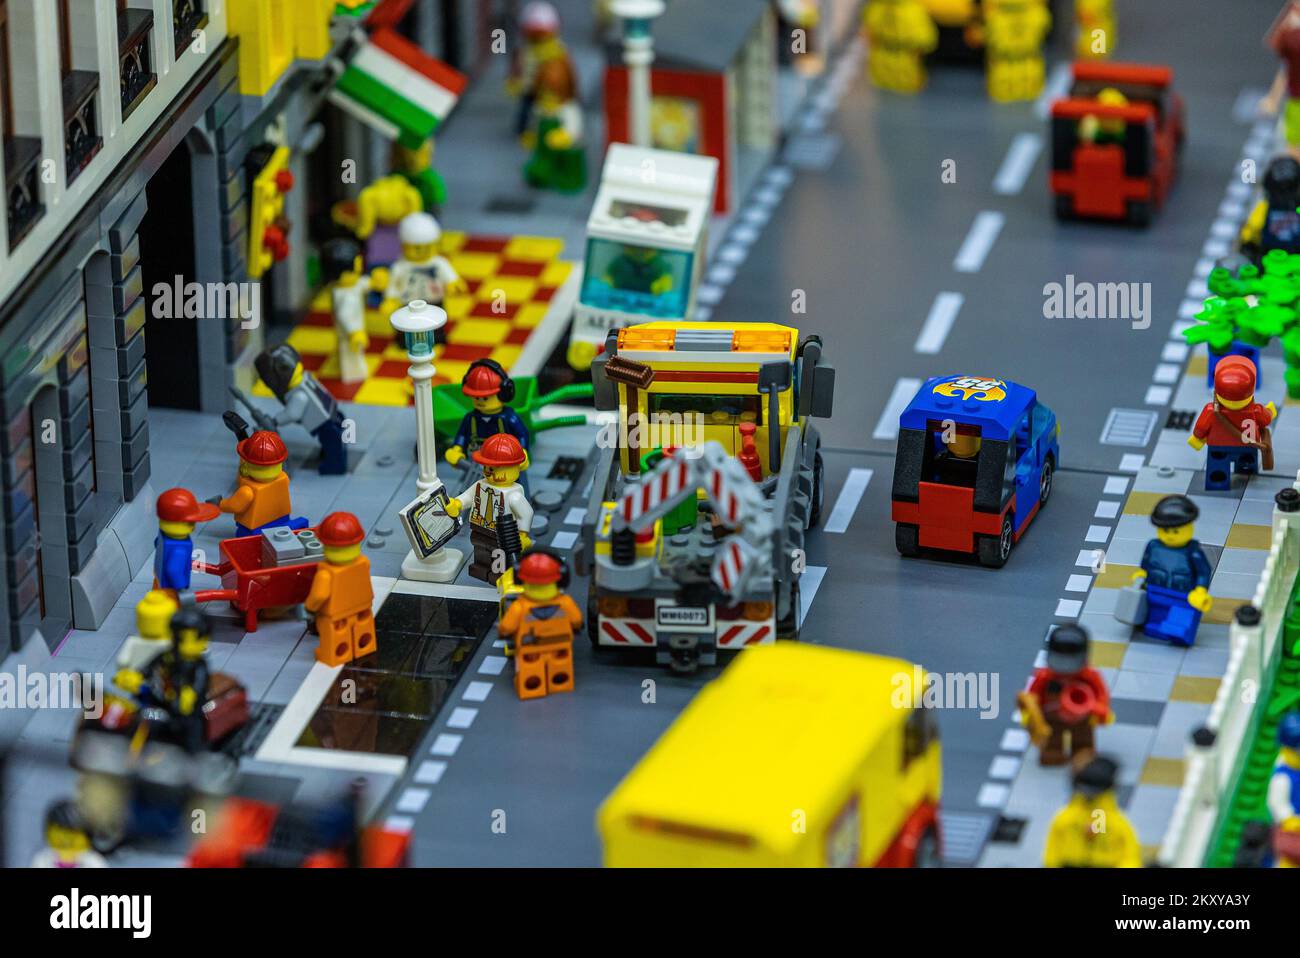 Photo taken on February 07, 2022 shows a 5 meter long Lego City made by  collector Dinko Petz, in Djakovo, Croatia. Photo: Davor Javorovic/PIXSELL  Stock Photo - Alamy